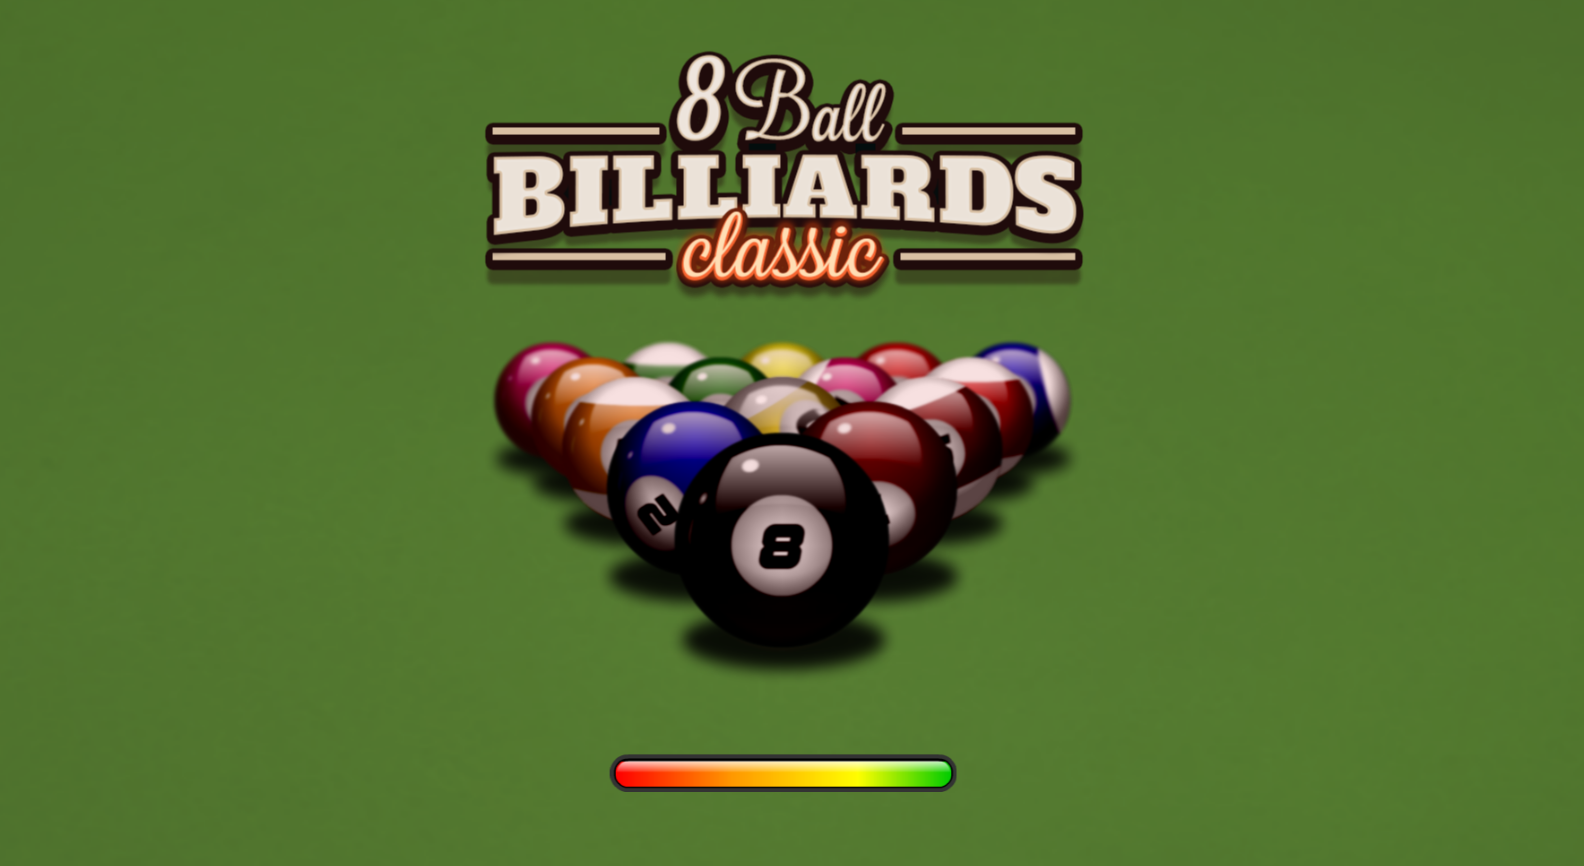 The loading screen for 8 Ball Billiards Classic.